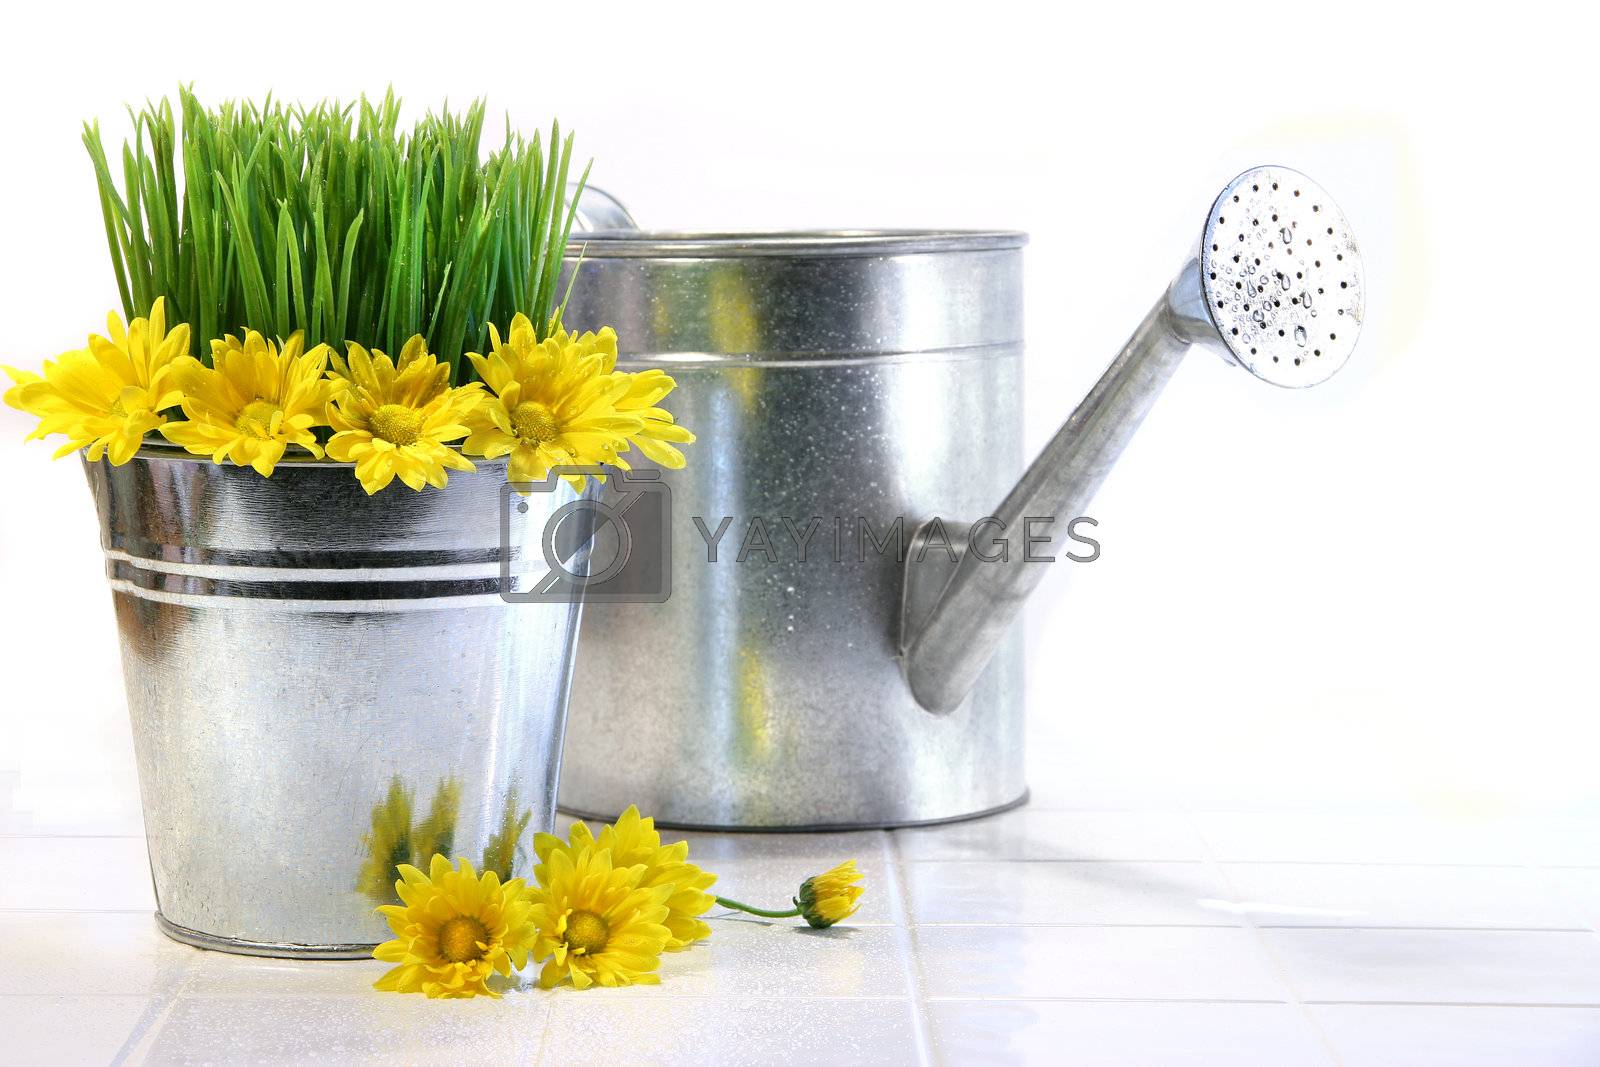 Royalty free image of Garden pot with grass, daisies and watering can  by Sandralise